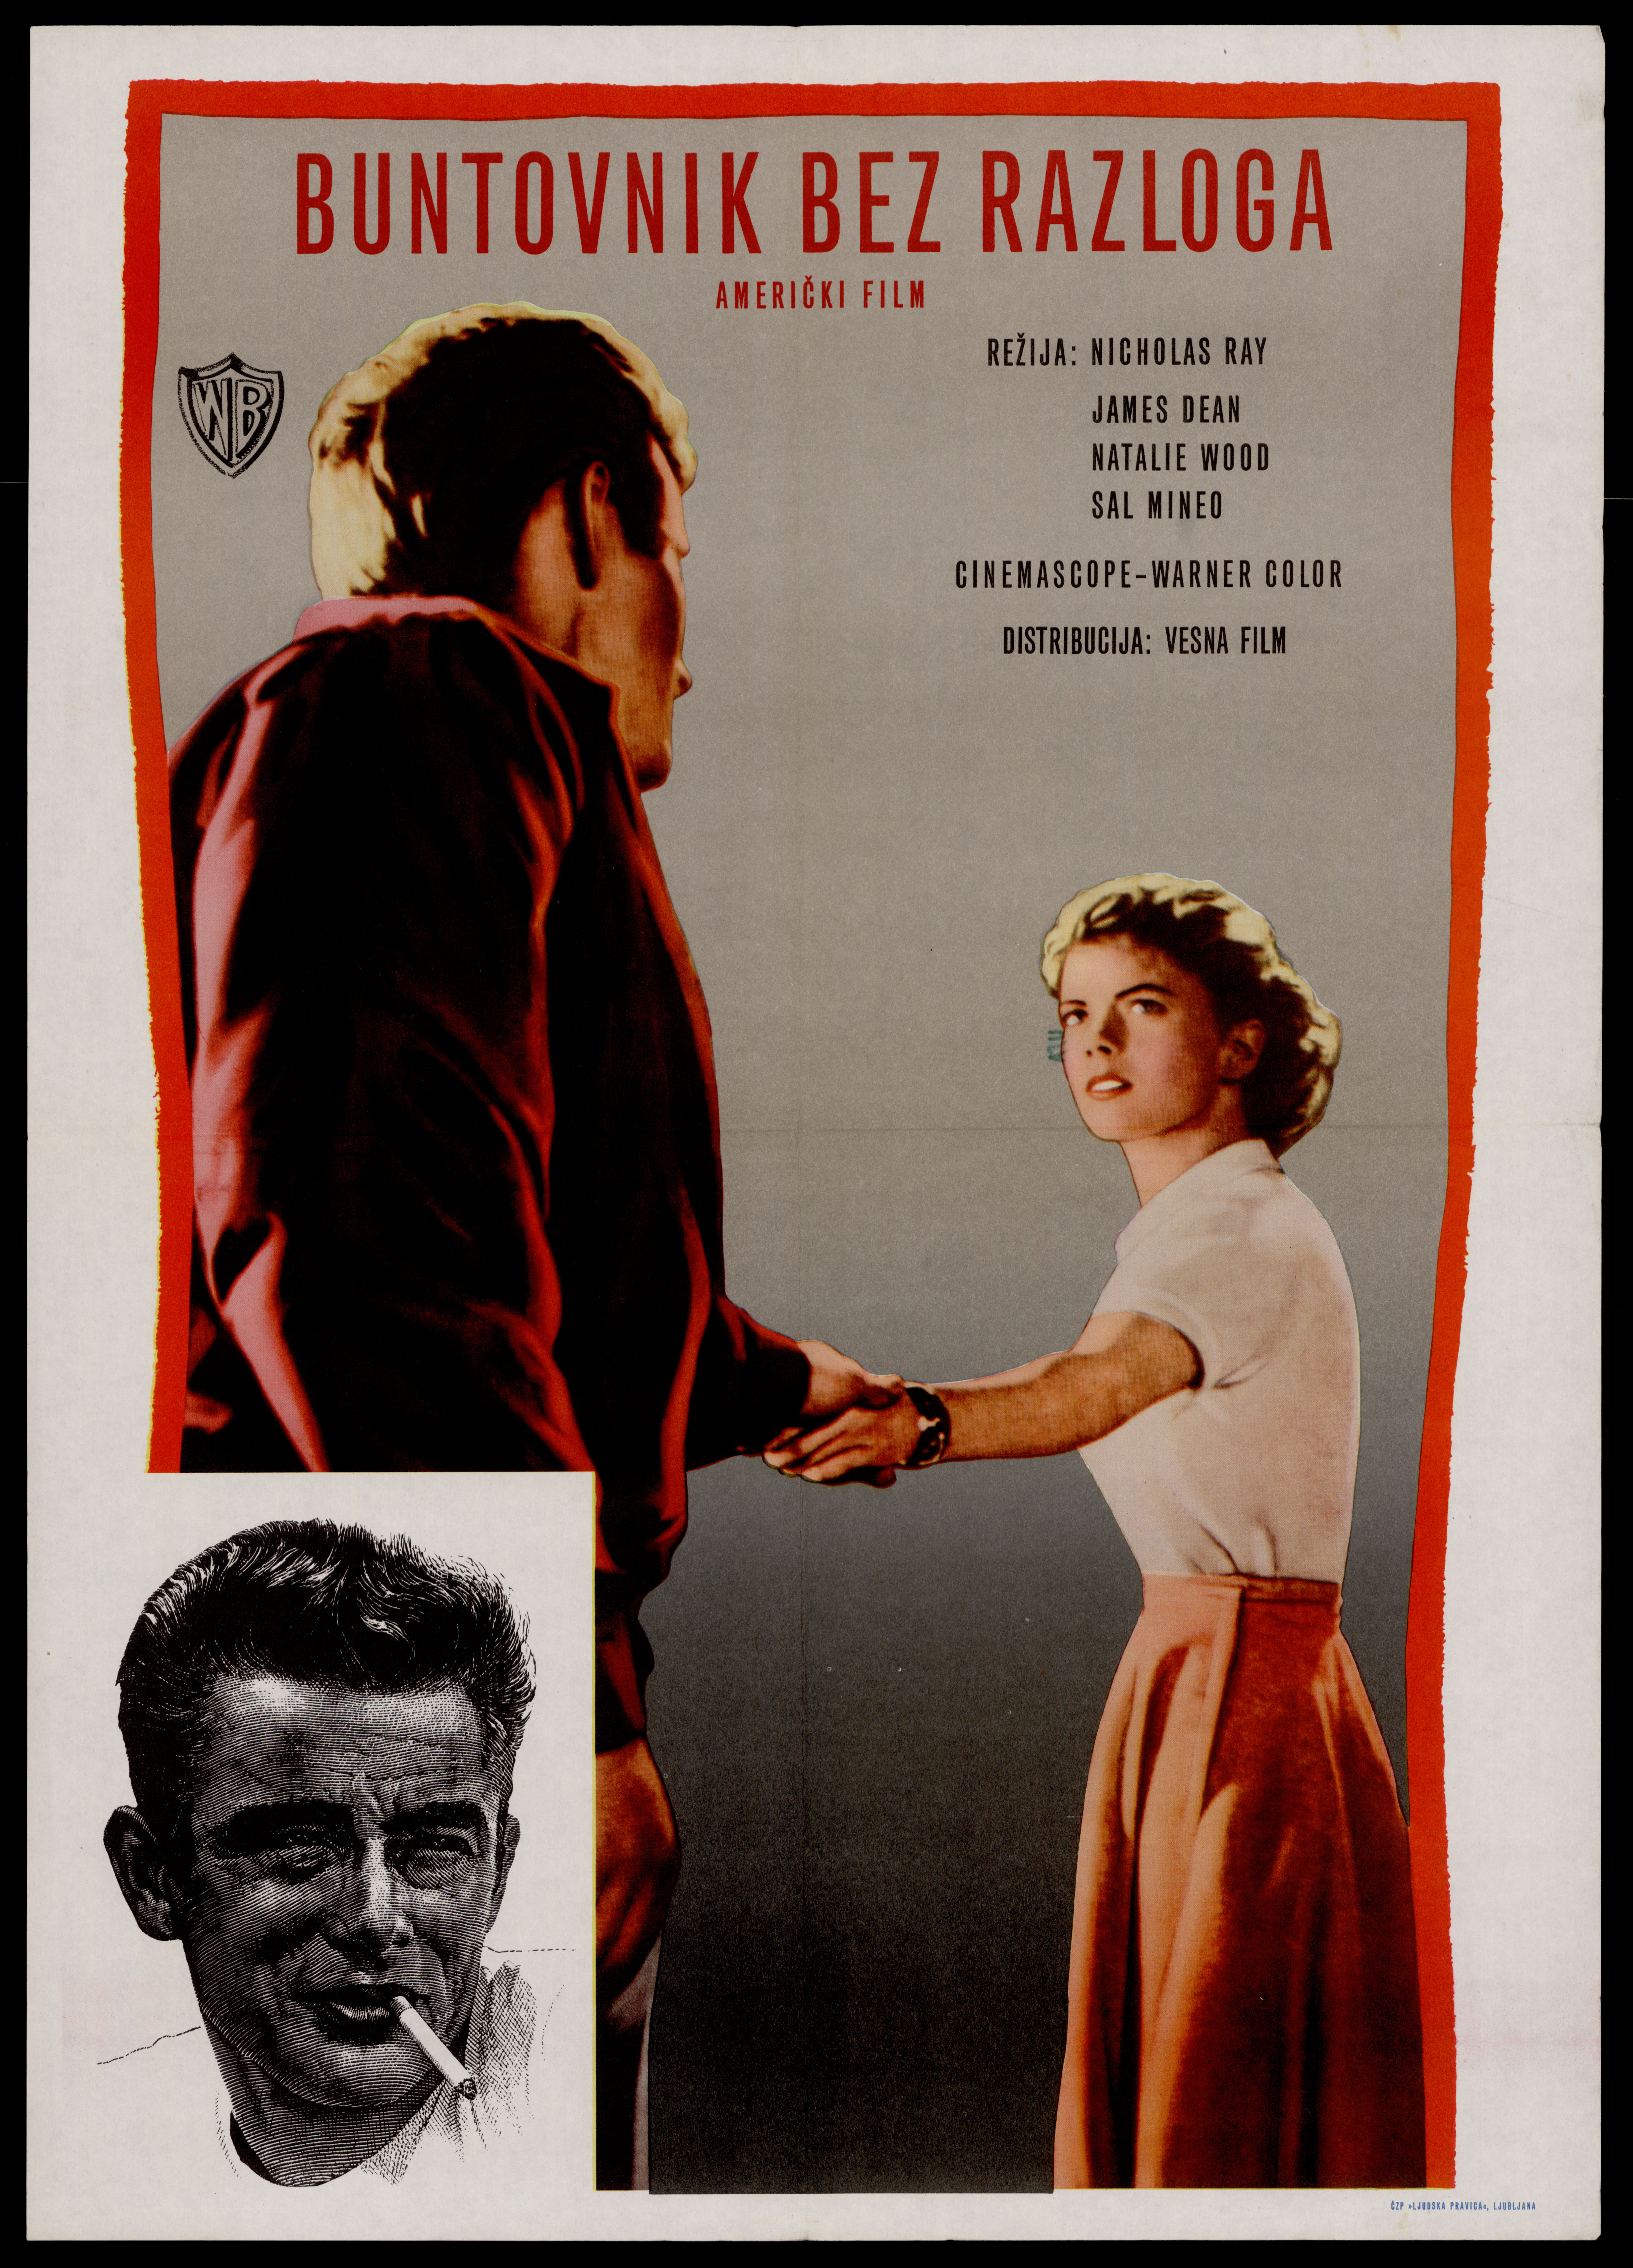 A poster for the movie Rebel without a Cause (1955) featuring James Dean, whose influence was criticised by the Ideological Commission even before its screening in Yugoslavia.